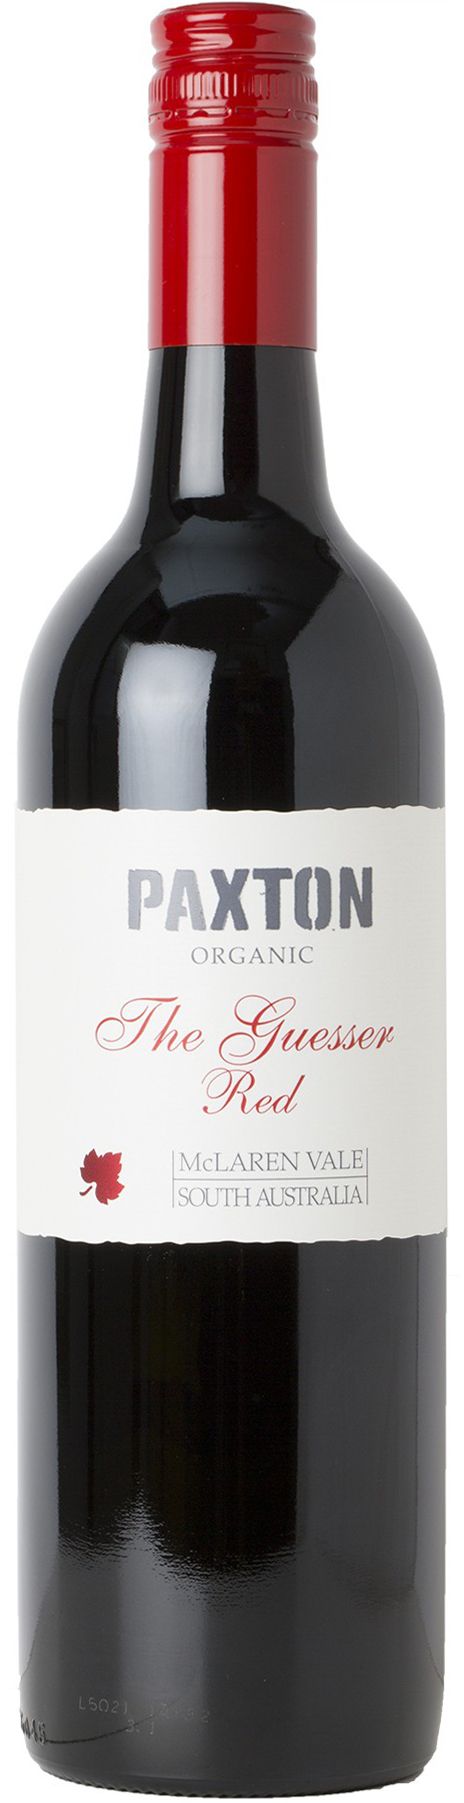 Paxton, The Guesser Organic Red, 2016